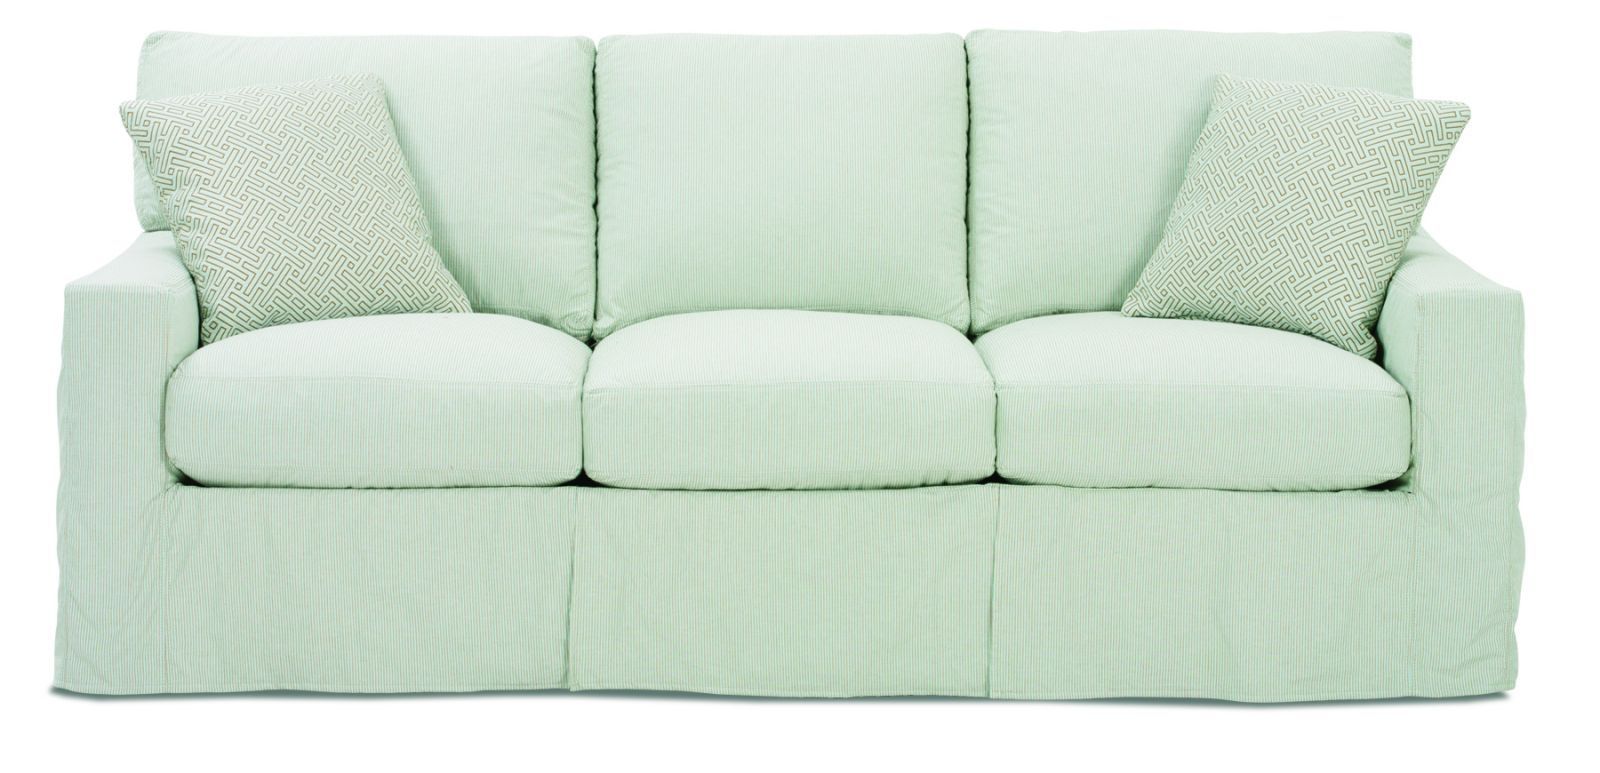 Sofas Center Bibbidi Bobbidi Beautiful How To Slipcover Sofas Throughout Slipcovers For Sofas And Chairs (View 5 of 15)